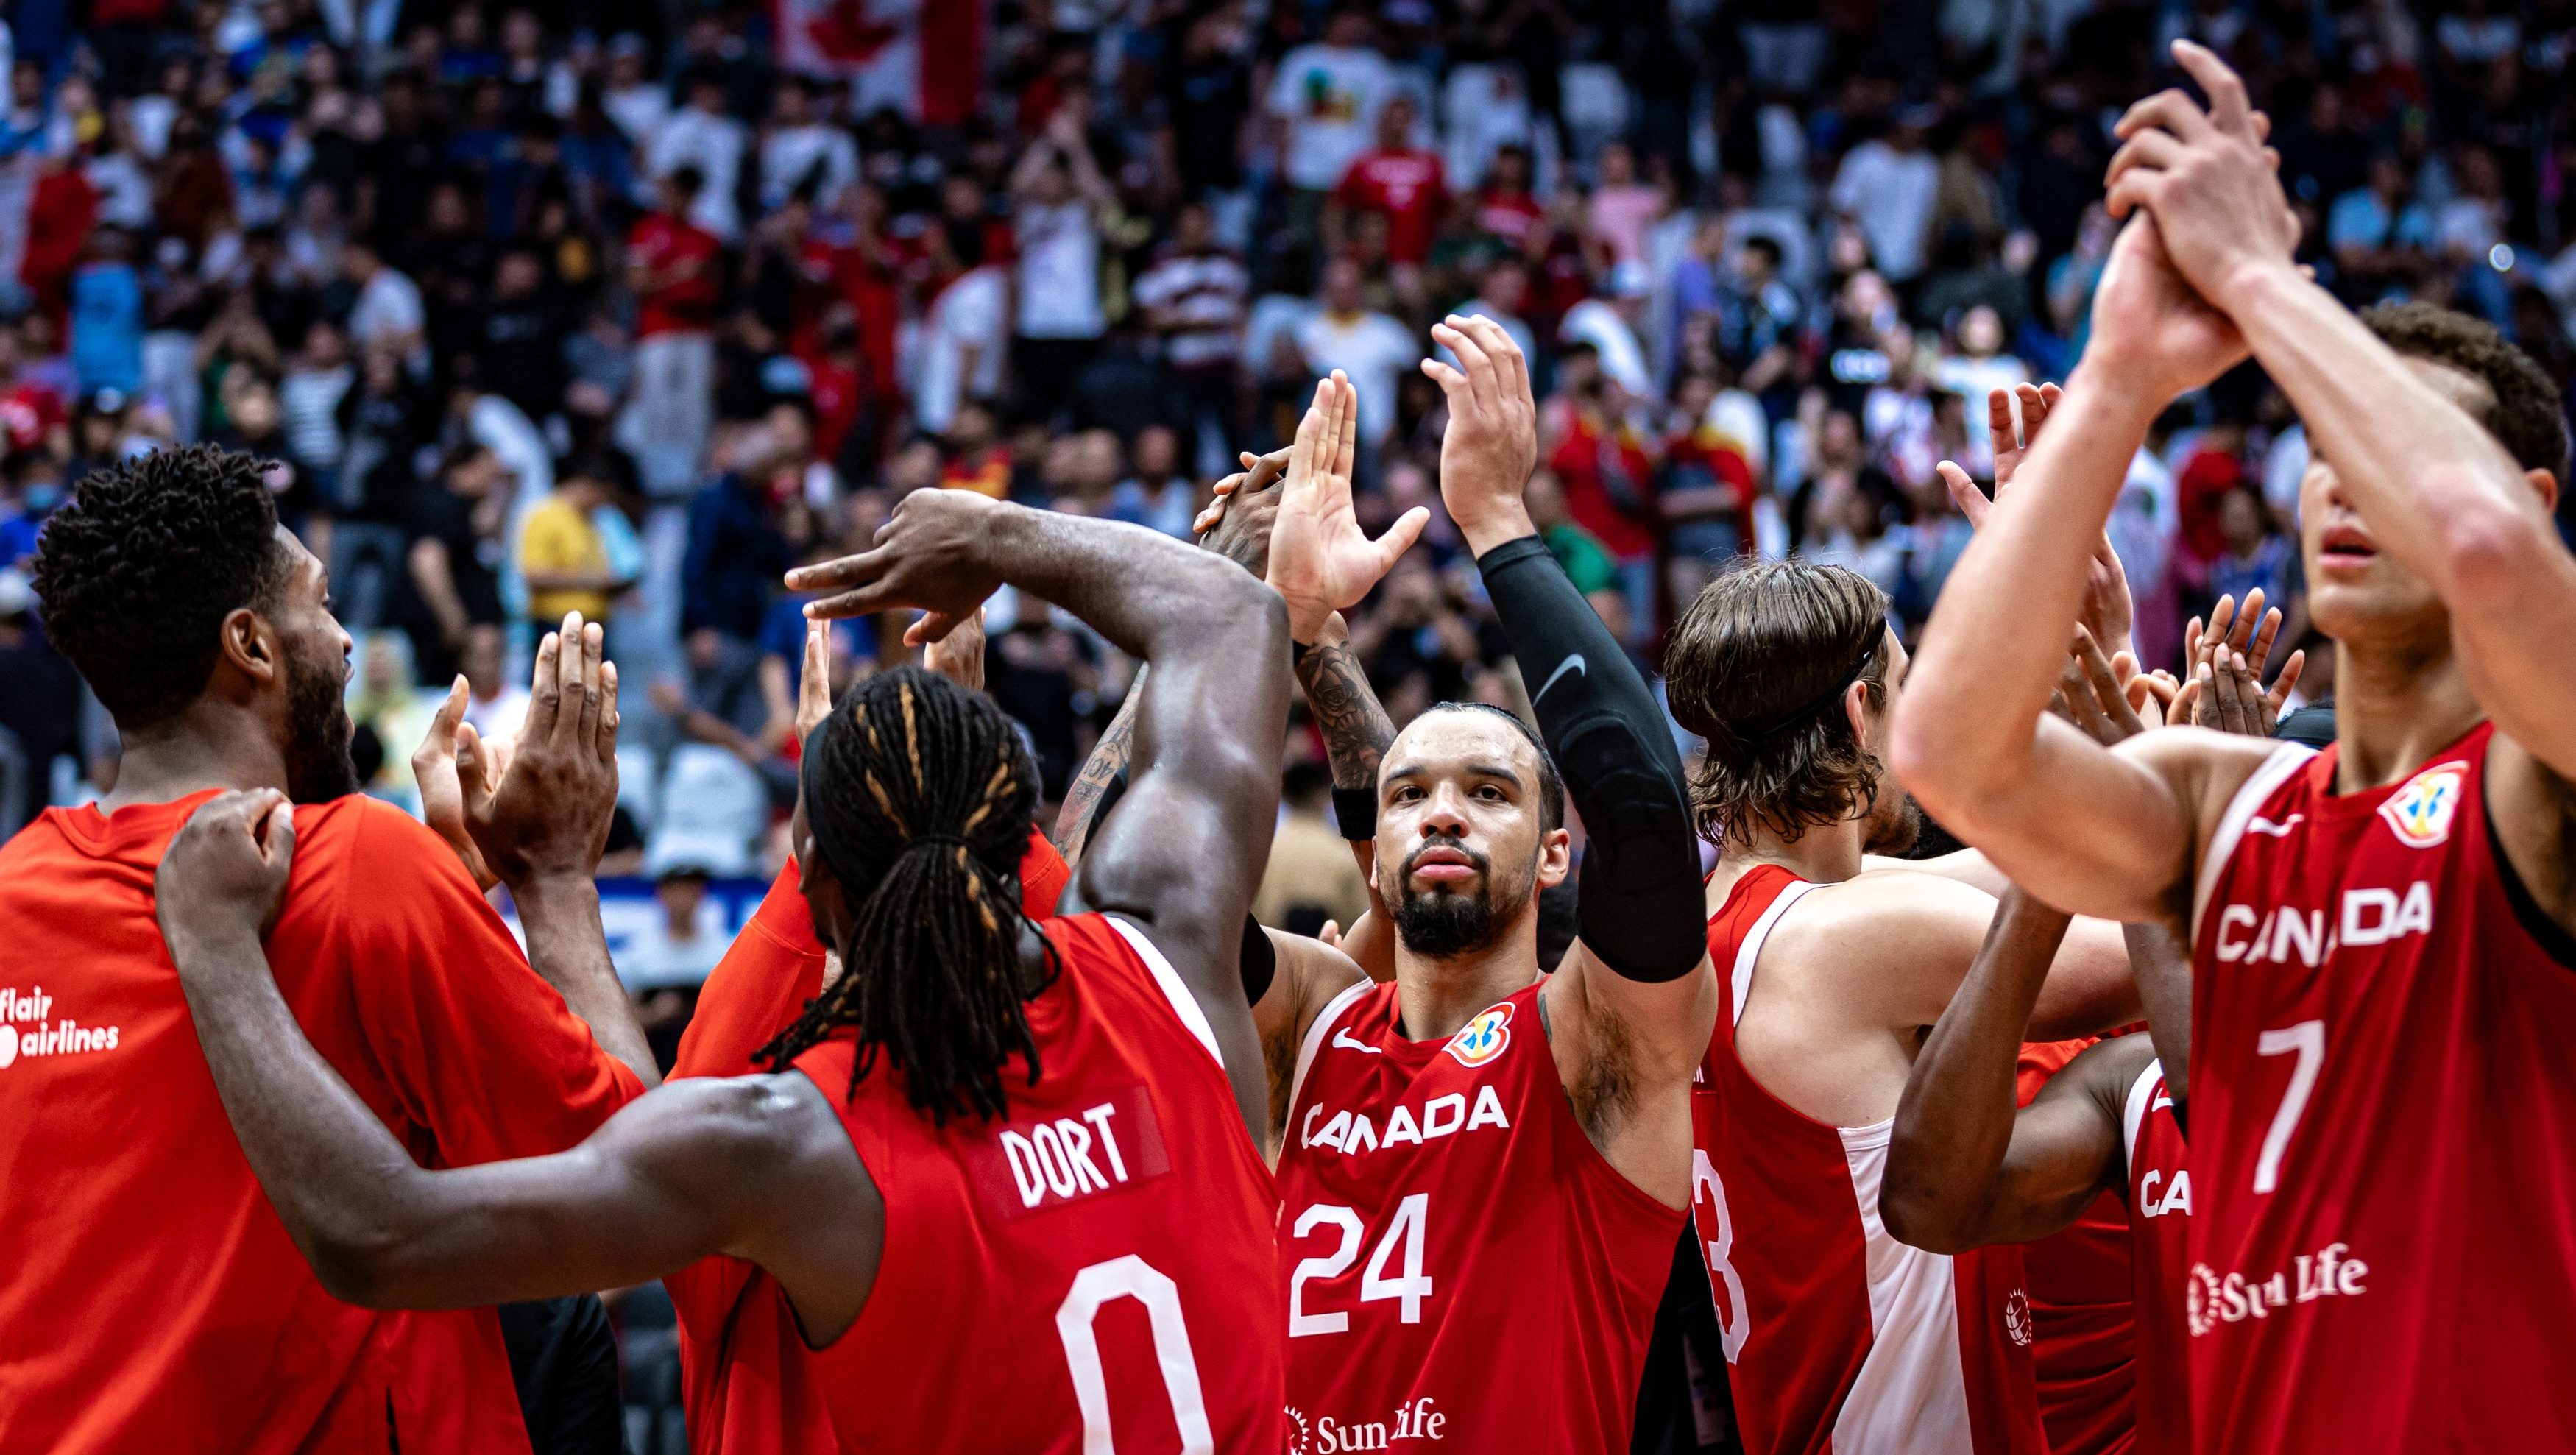 The Canadian men's basketball team was named CP Team of the Year – Team Canada